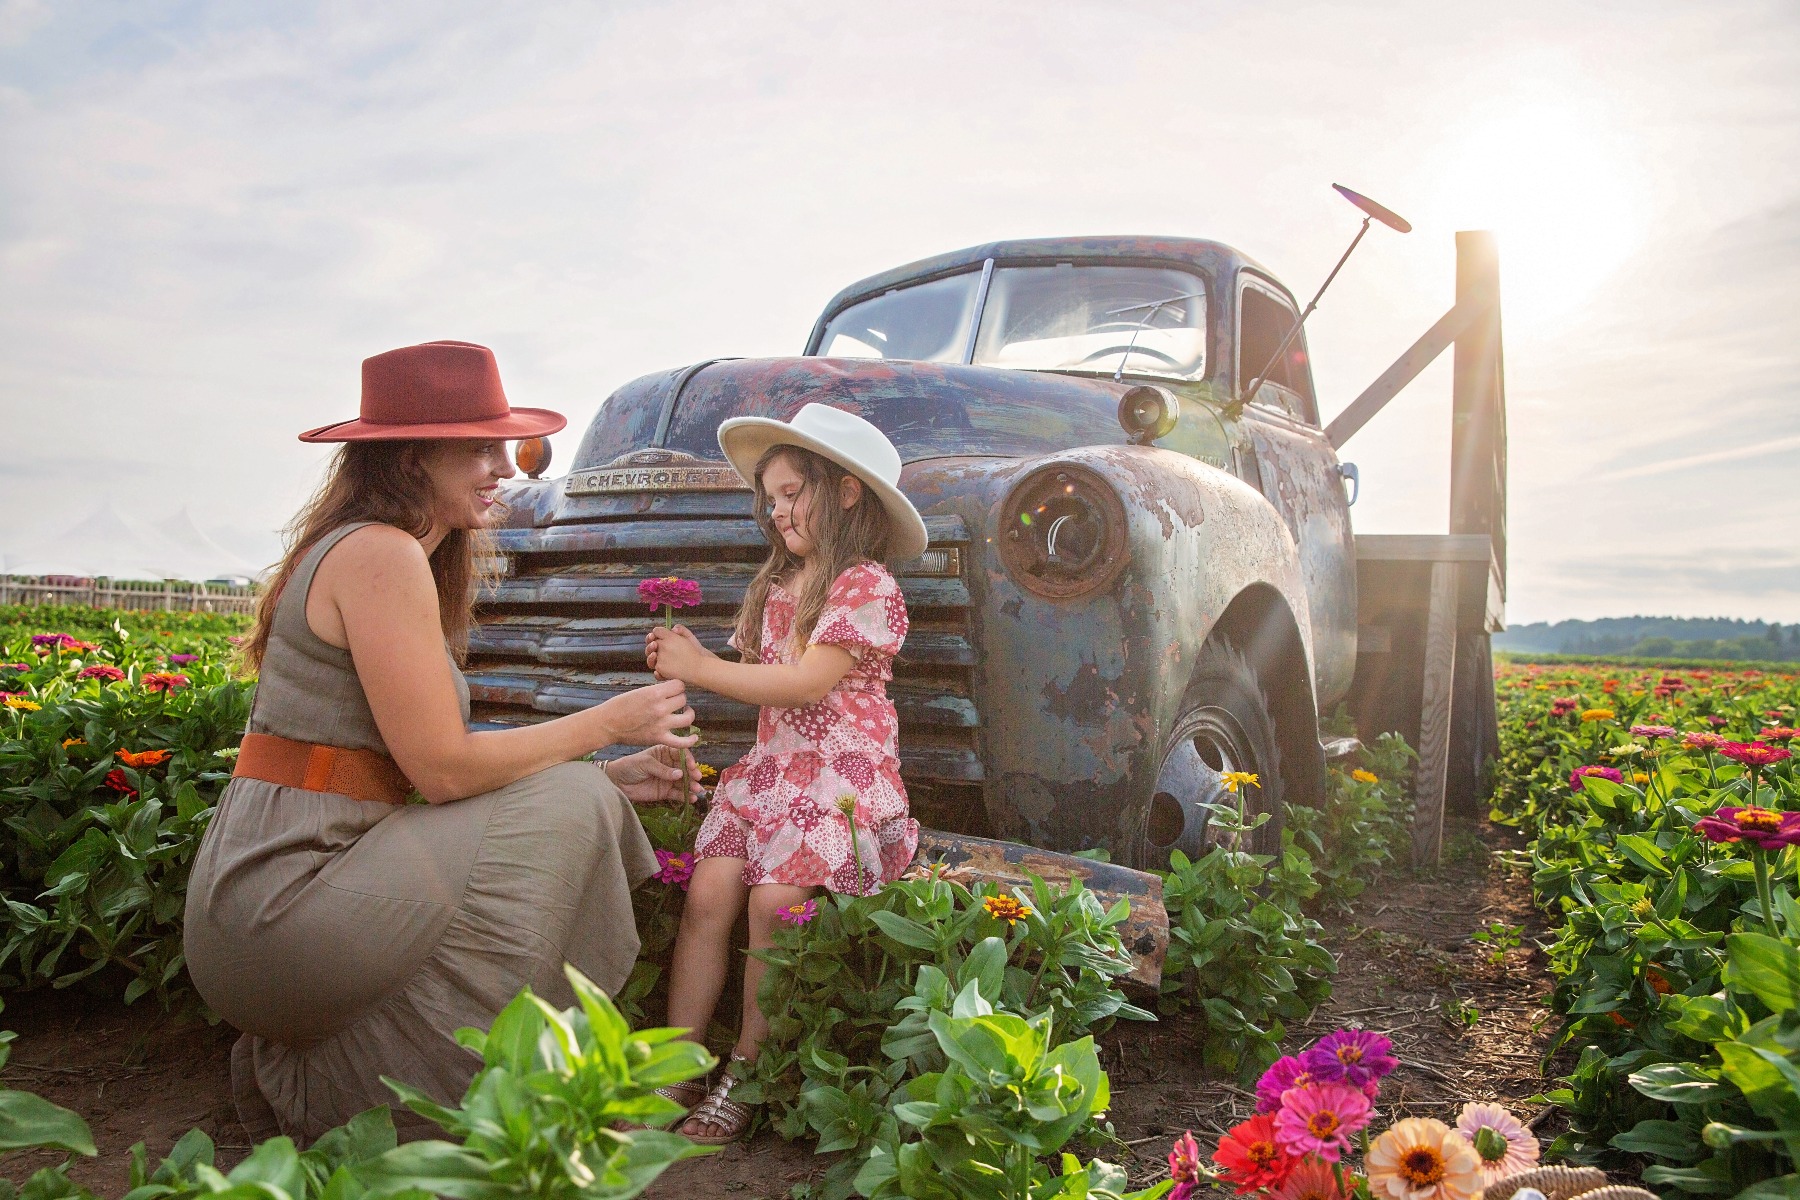 mom & young daughter in cowboy hats share flowers in front of a vintage truck